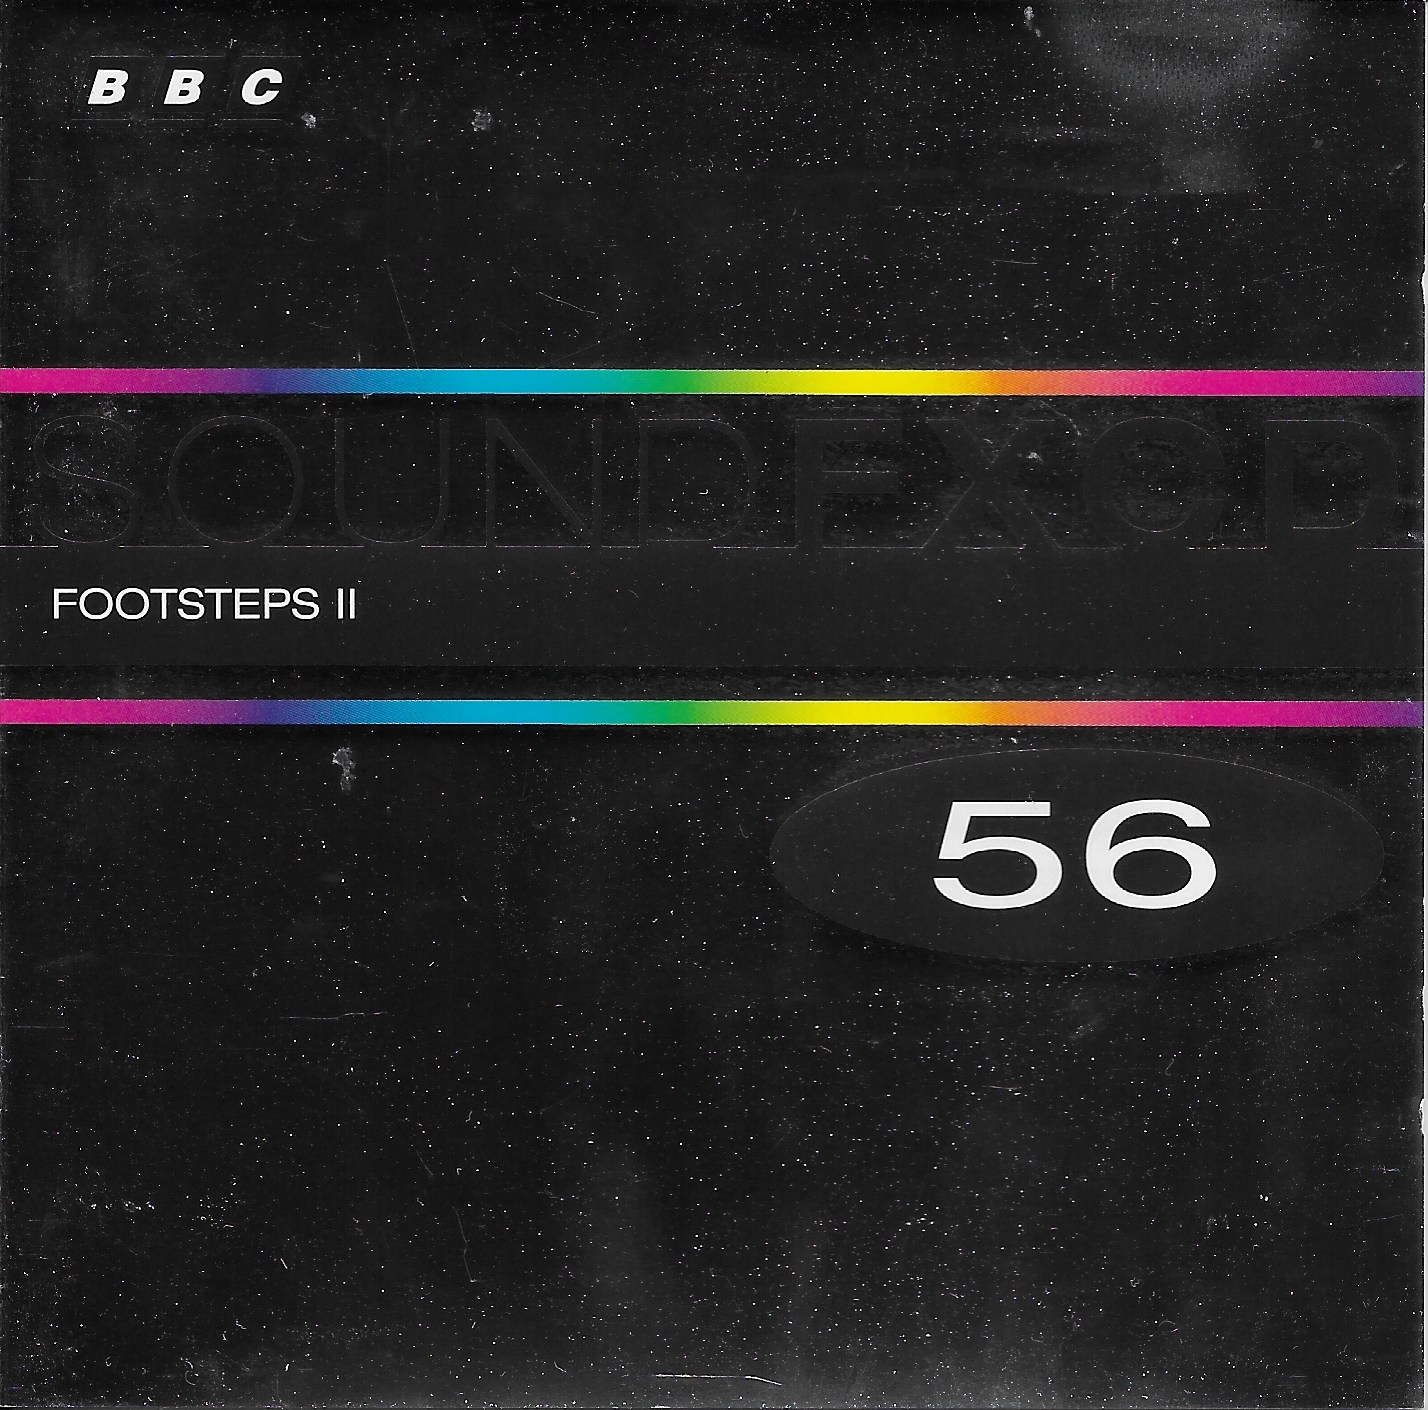 Picture of BBCCD SFX056 Footsteps II by artist Various from the BBC cds - Records and Tapes library